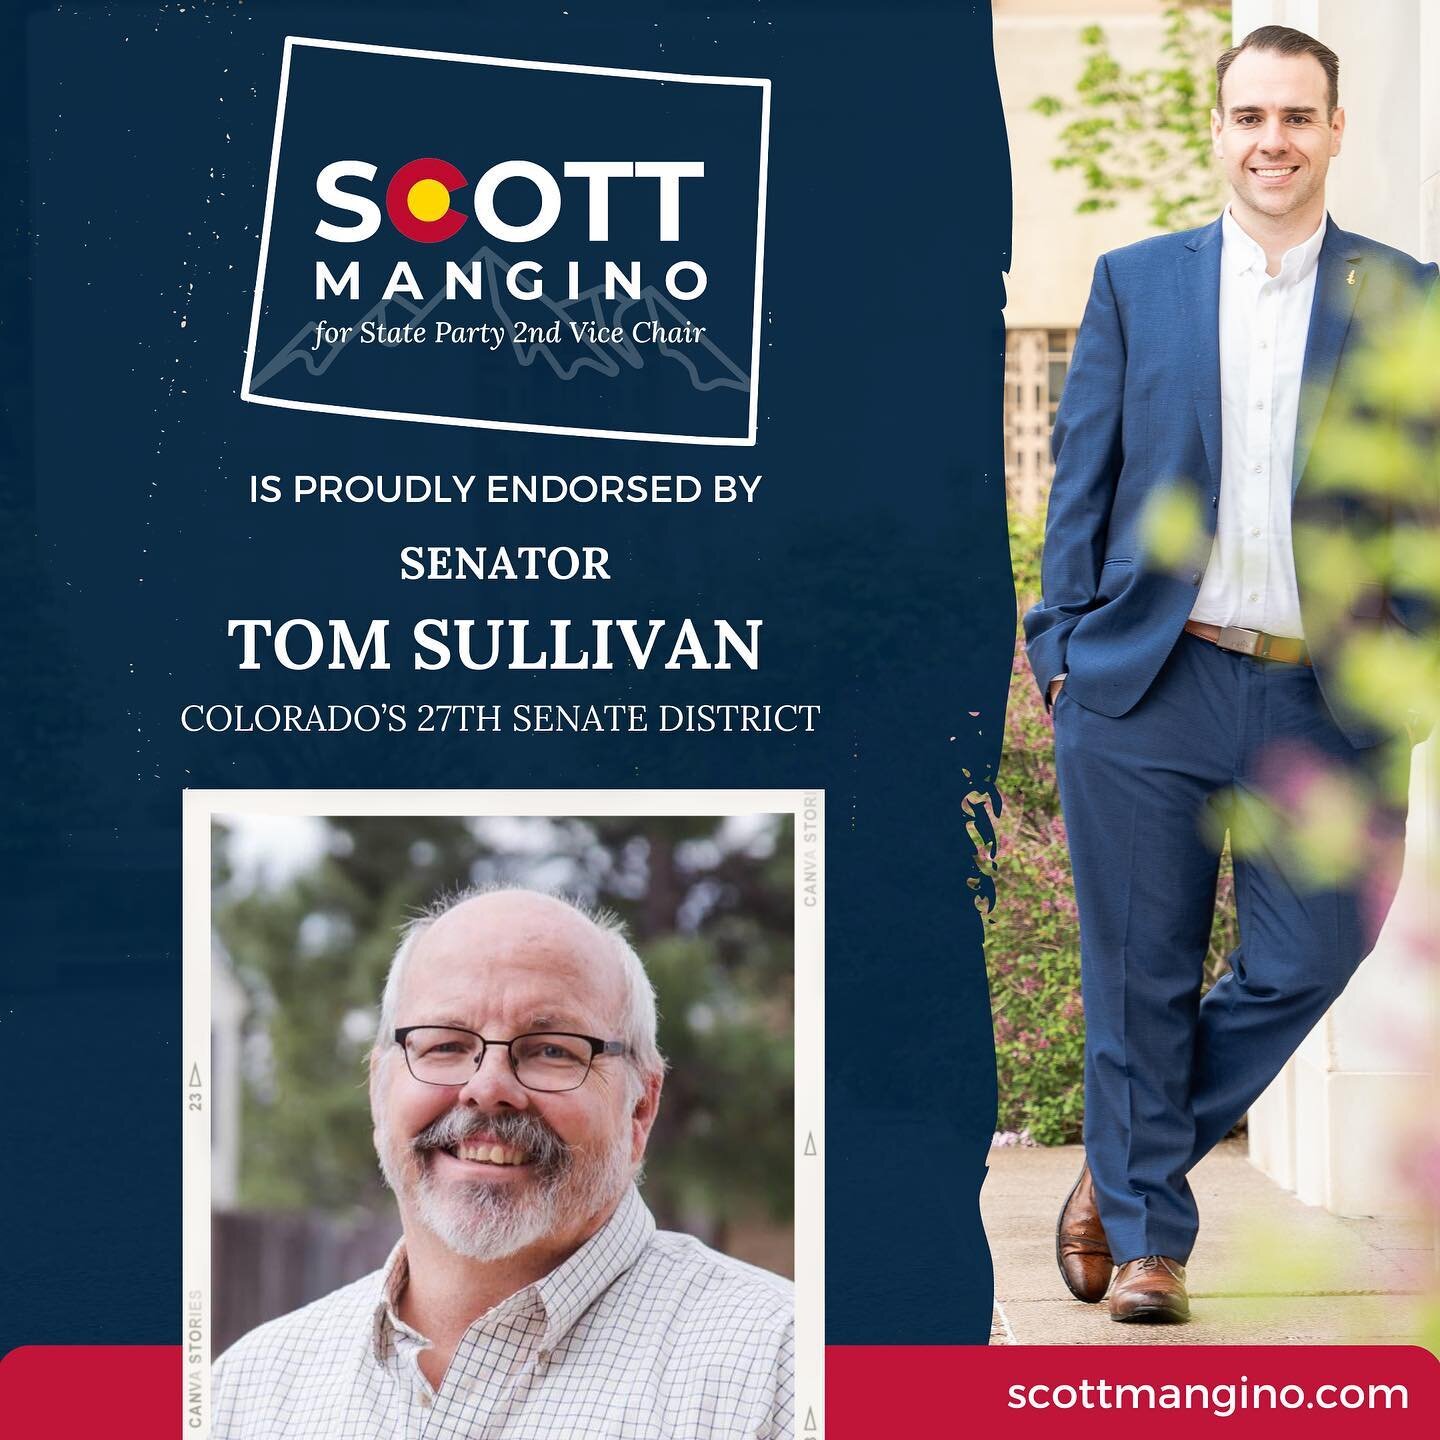 Some of us slowly become activists, while others have activism thrust upon us, finding our voice in times of immense pain &amp; hurt. I couldn&rsquo;t be more honored to have the endorsement of @senatortomsullivan, channeling his lived experience to 